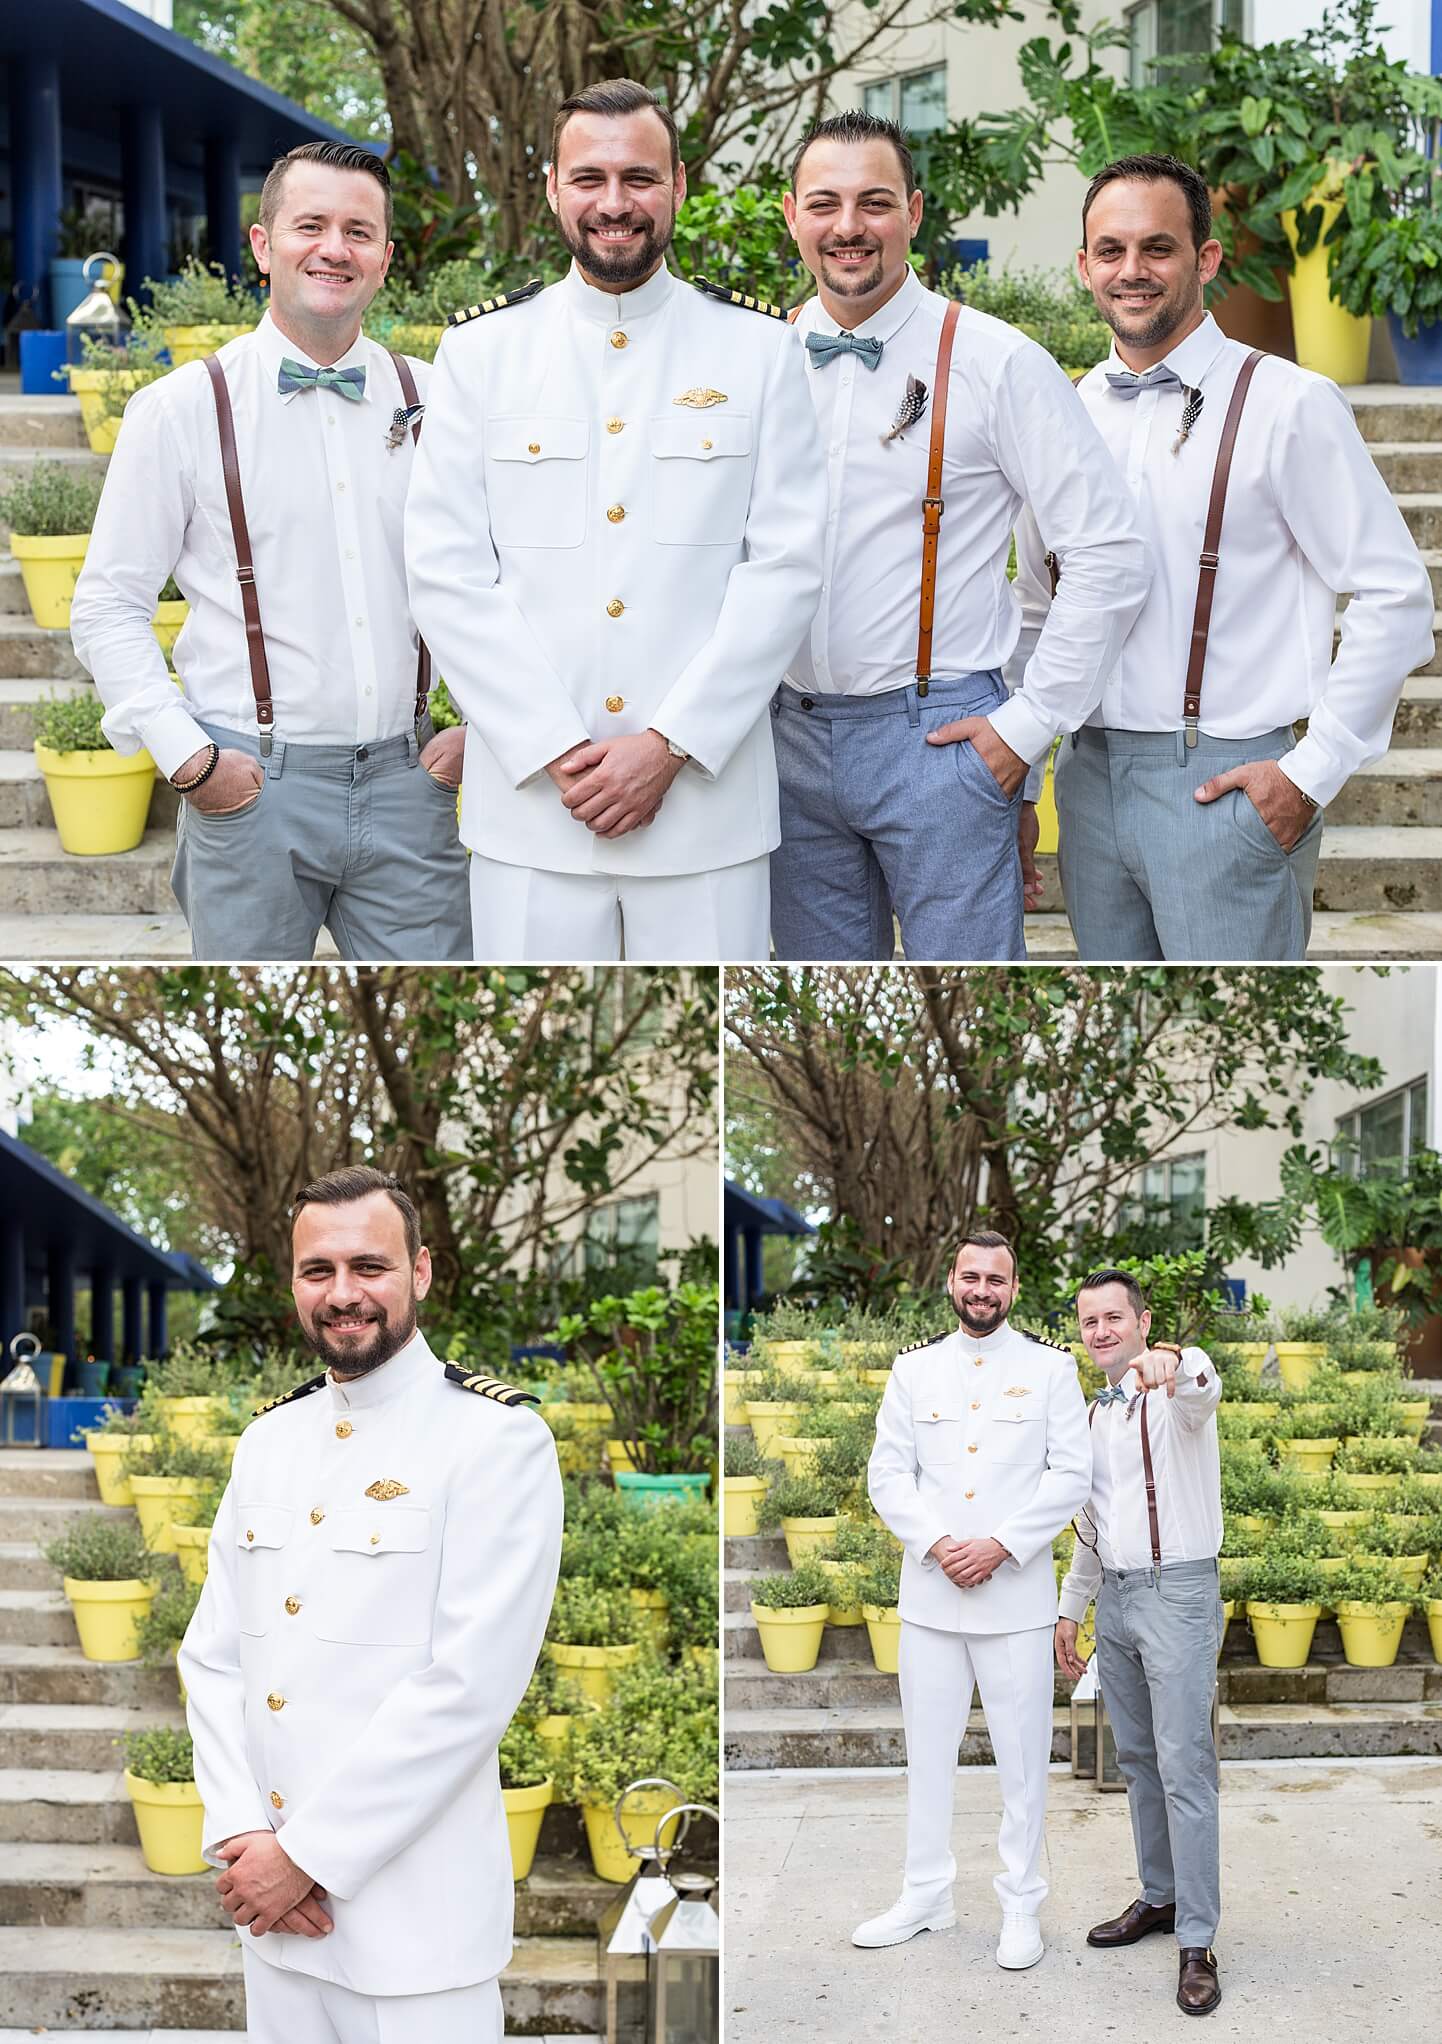 Groom & Groomsmen Formal Portraits at Wedding in South Beach | Photo By White House Wedding pHotography